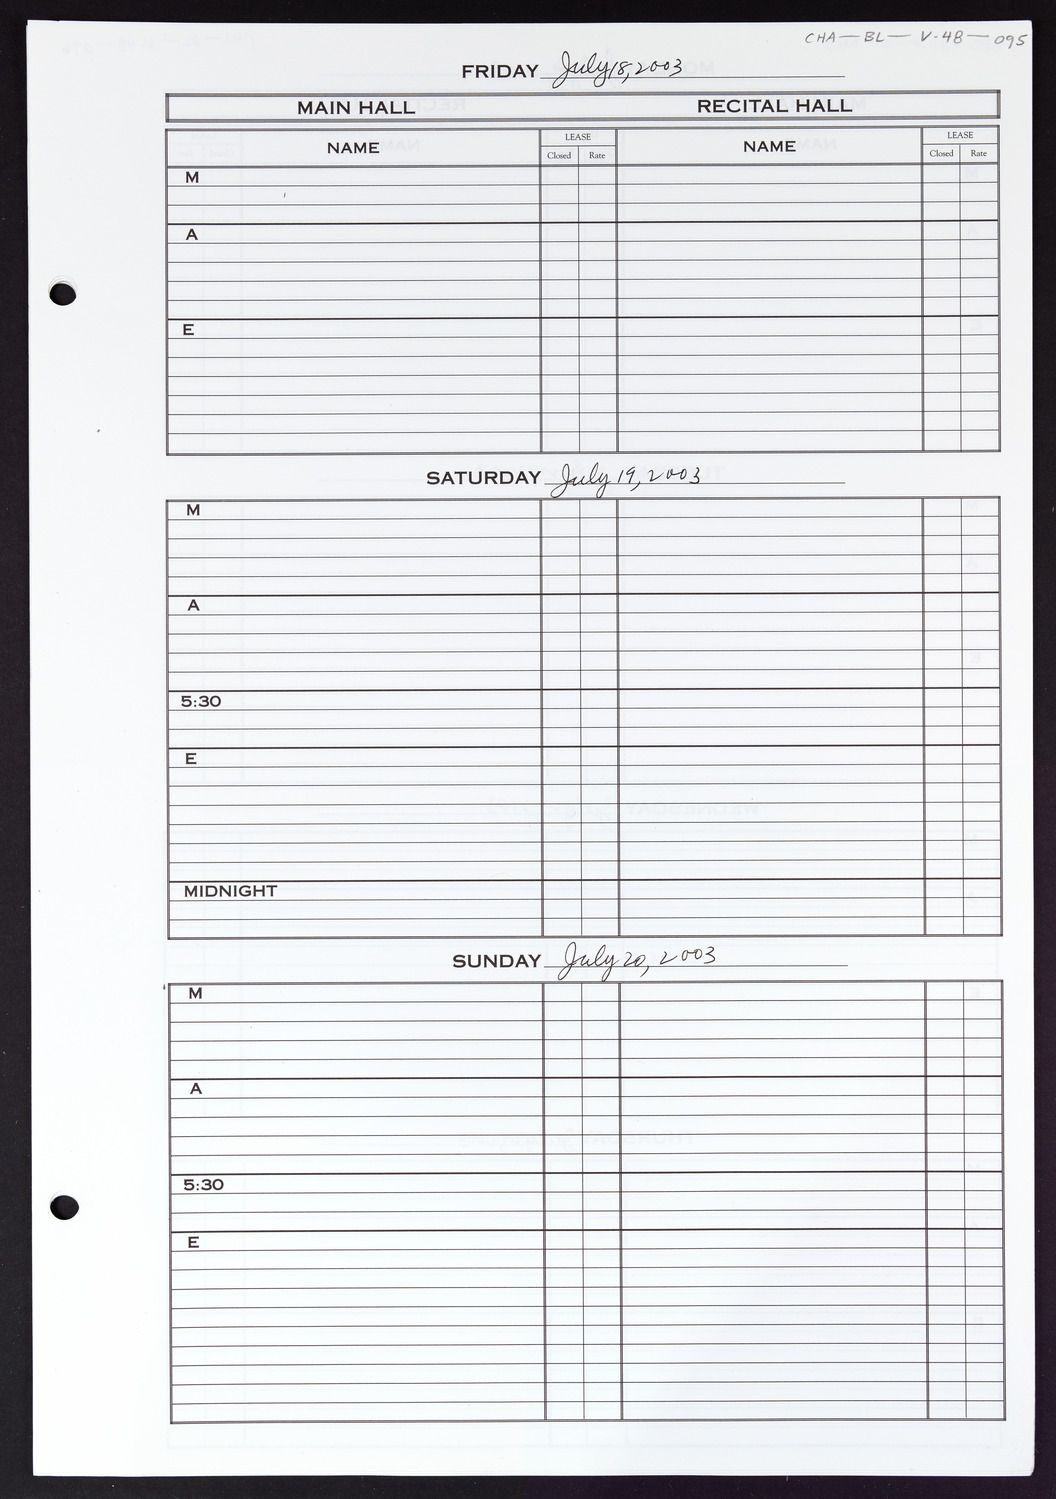 Carnegie Hall Booking Ledger, volume 48, page 95